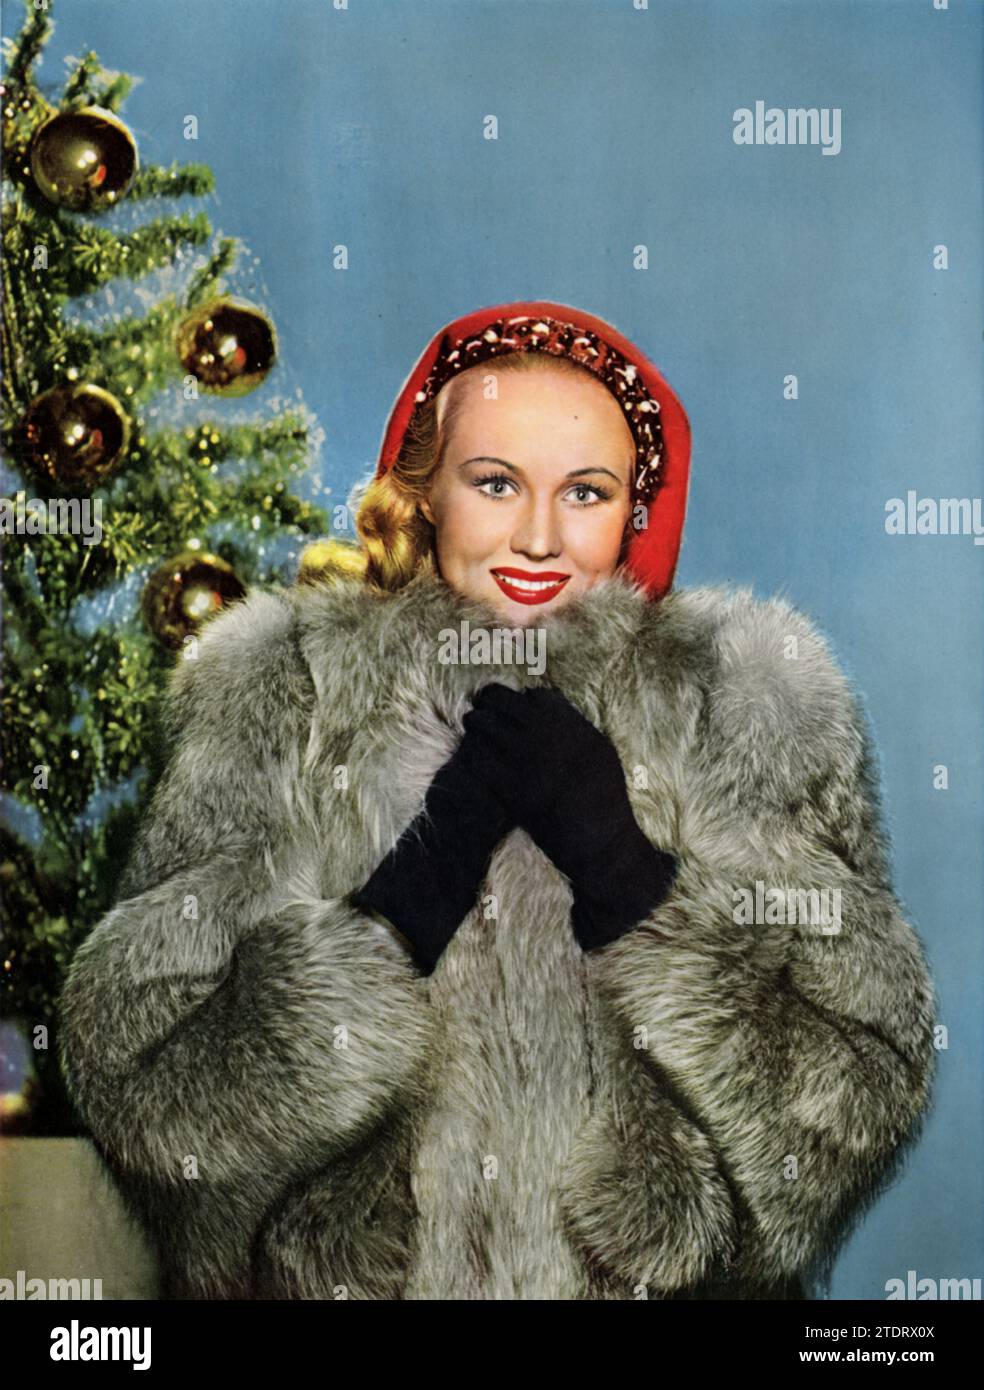 Virginia Mayo, born on November 30, 1920, and passing away on January 17, 2005, was a renowned American actress, celebrated for her role in the critically acclaimed film 'The Best Years of Our Lives' (1946). In this classic post-World War II drama, Mayo played Marie Derry, a character whose marriage is strained by the return of her veteran husband. Her performance in the film showcased her ability to handle complex emotional roles, contributing to her reputation as a versatile and talented actress in Hollywood's Golden Age. Stock Photo